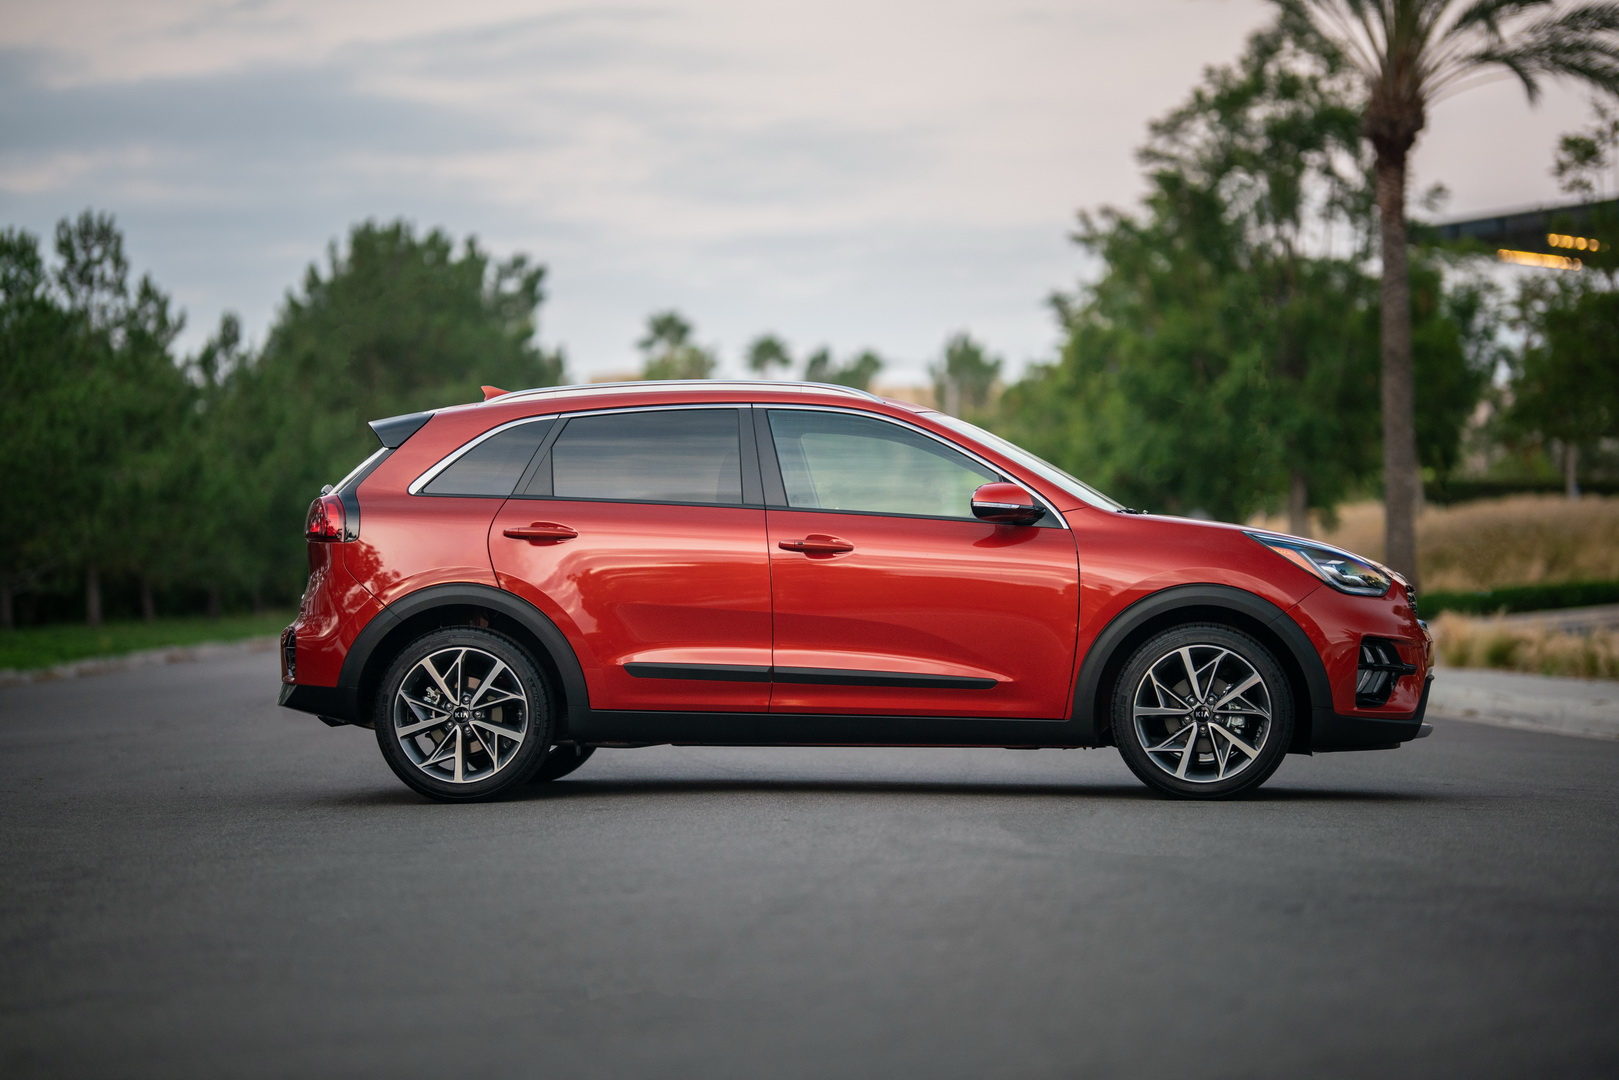 2020 Kia Niro Hybrid Goes Under The Knife, Adds New Tech | Carscoops